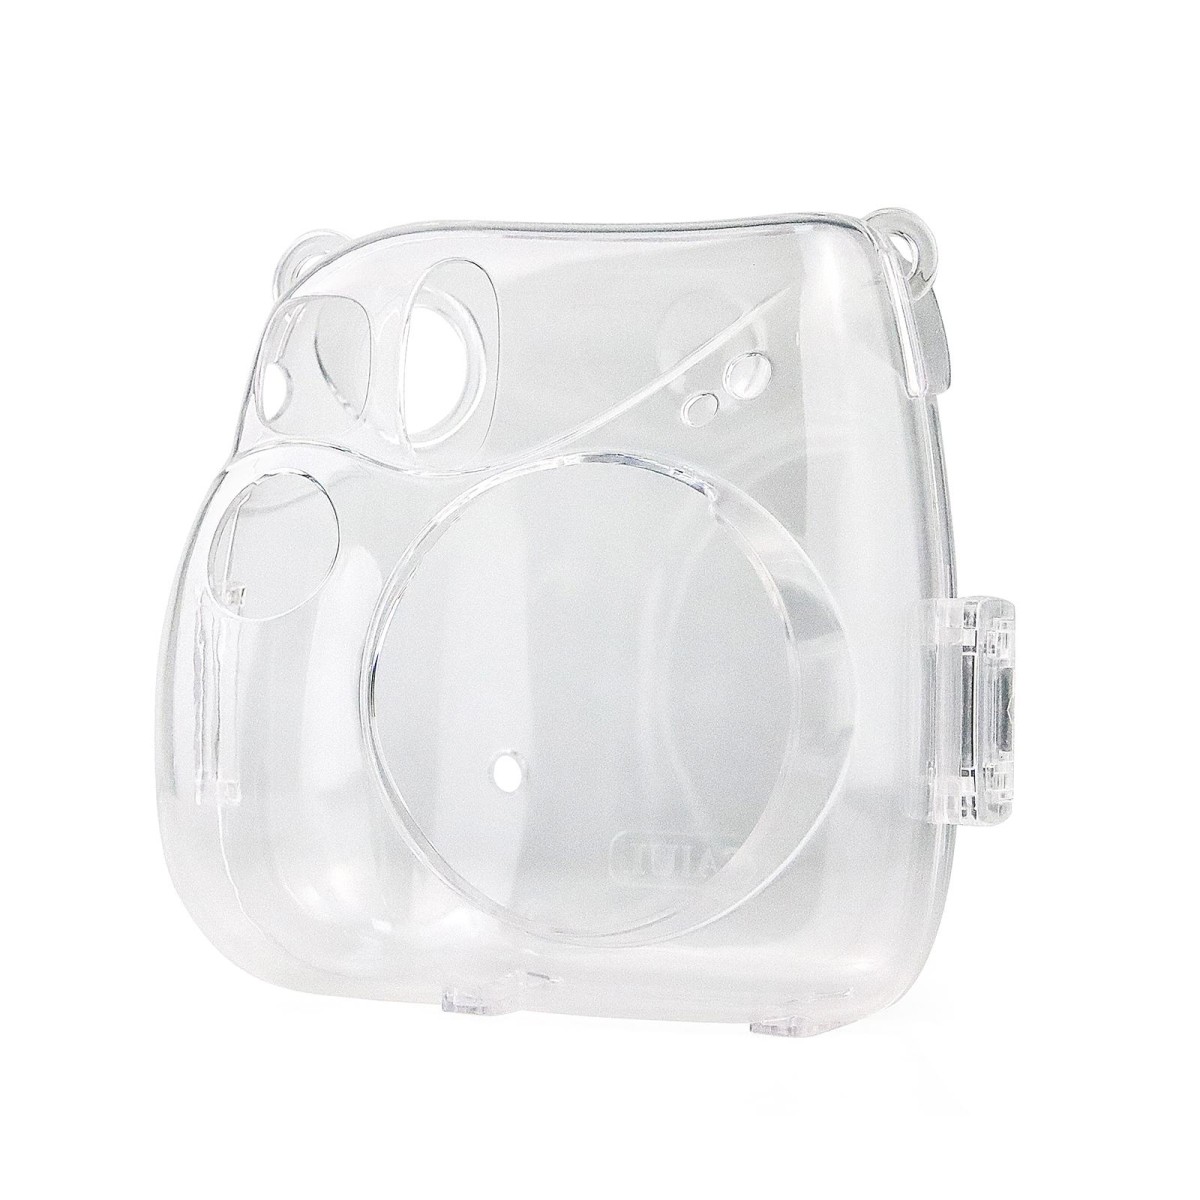 Protective Crystal Case with Strap For FUJIFILM Instax mini 7+(Transparent)